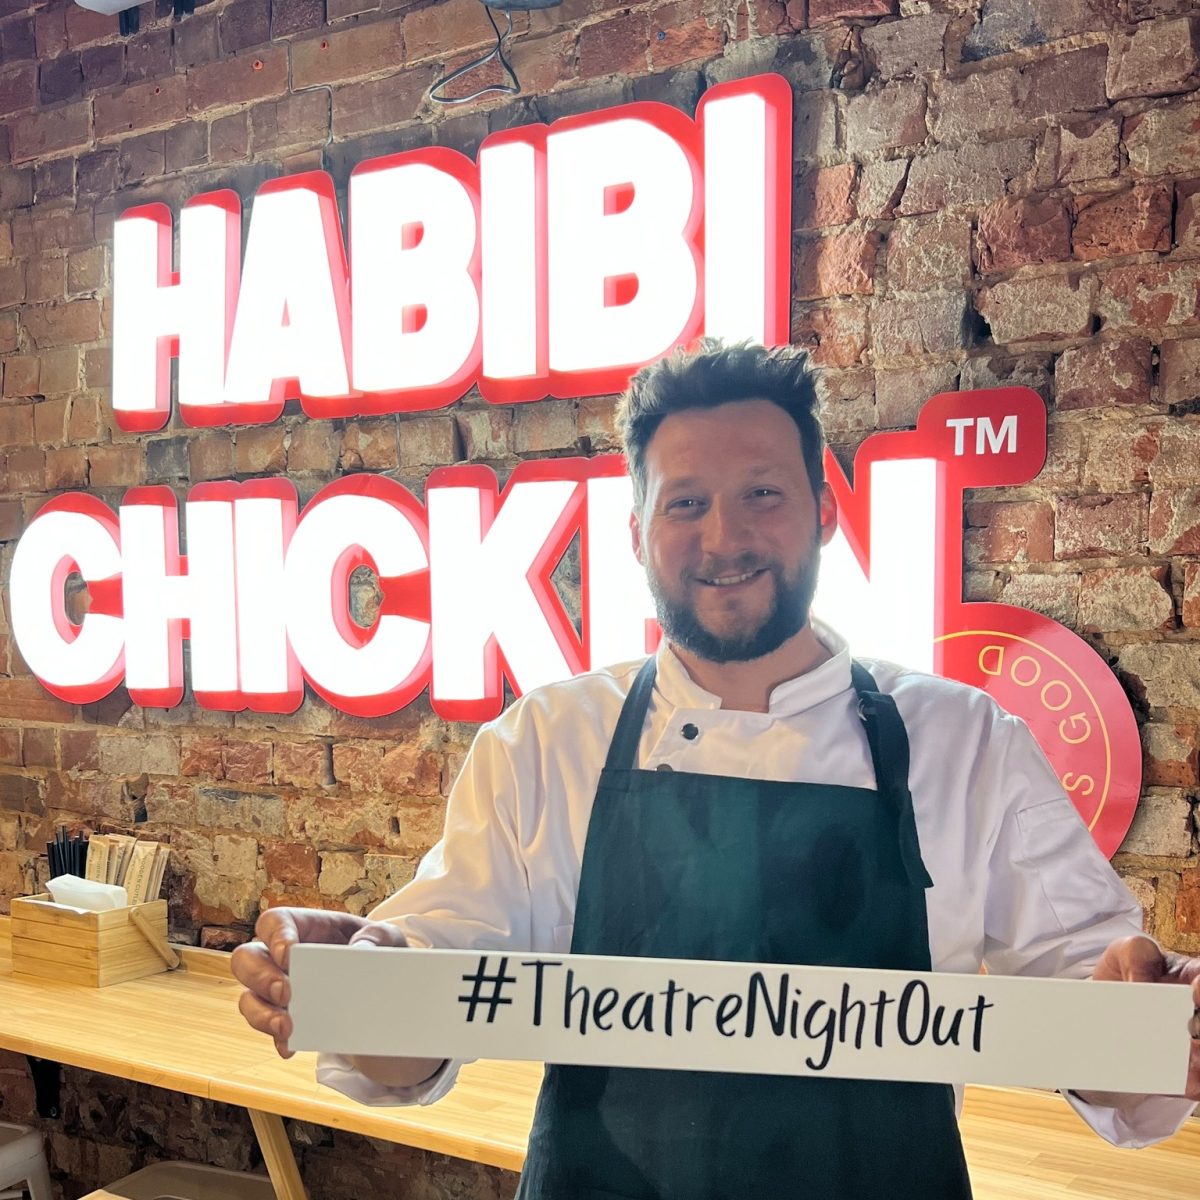 Habibi Chicken has been working closely with the Wagga Civic Theatre